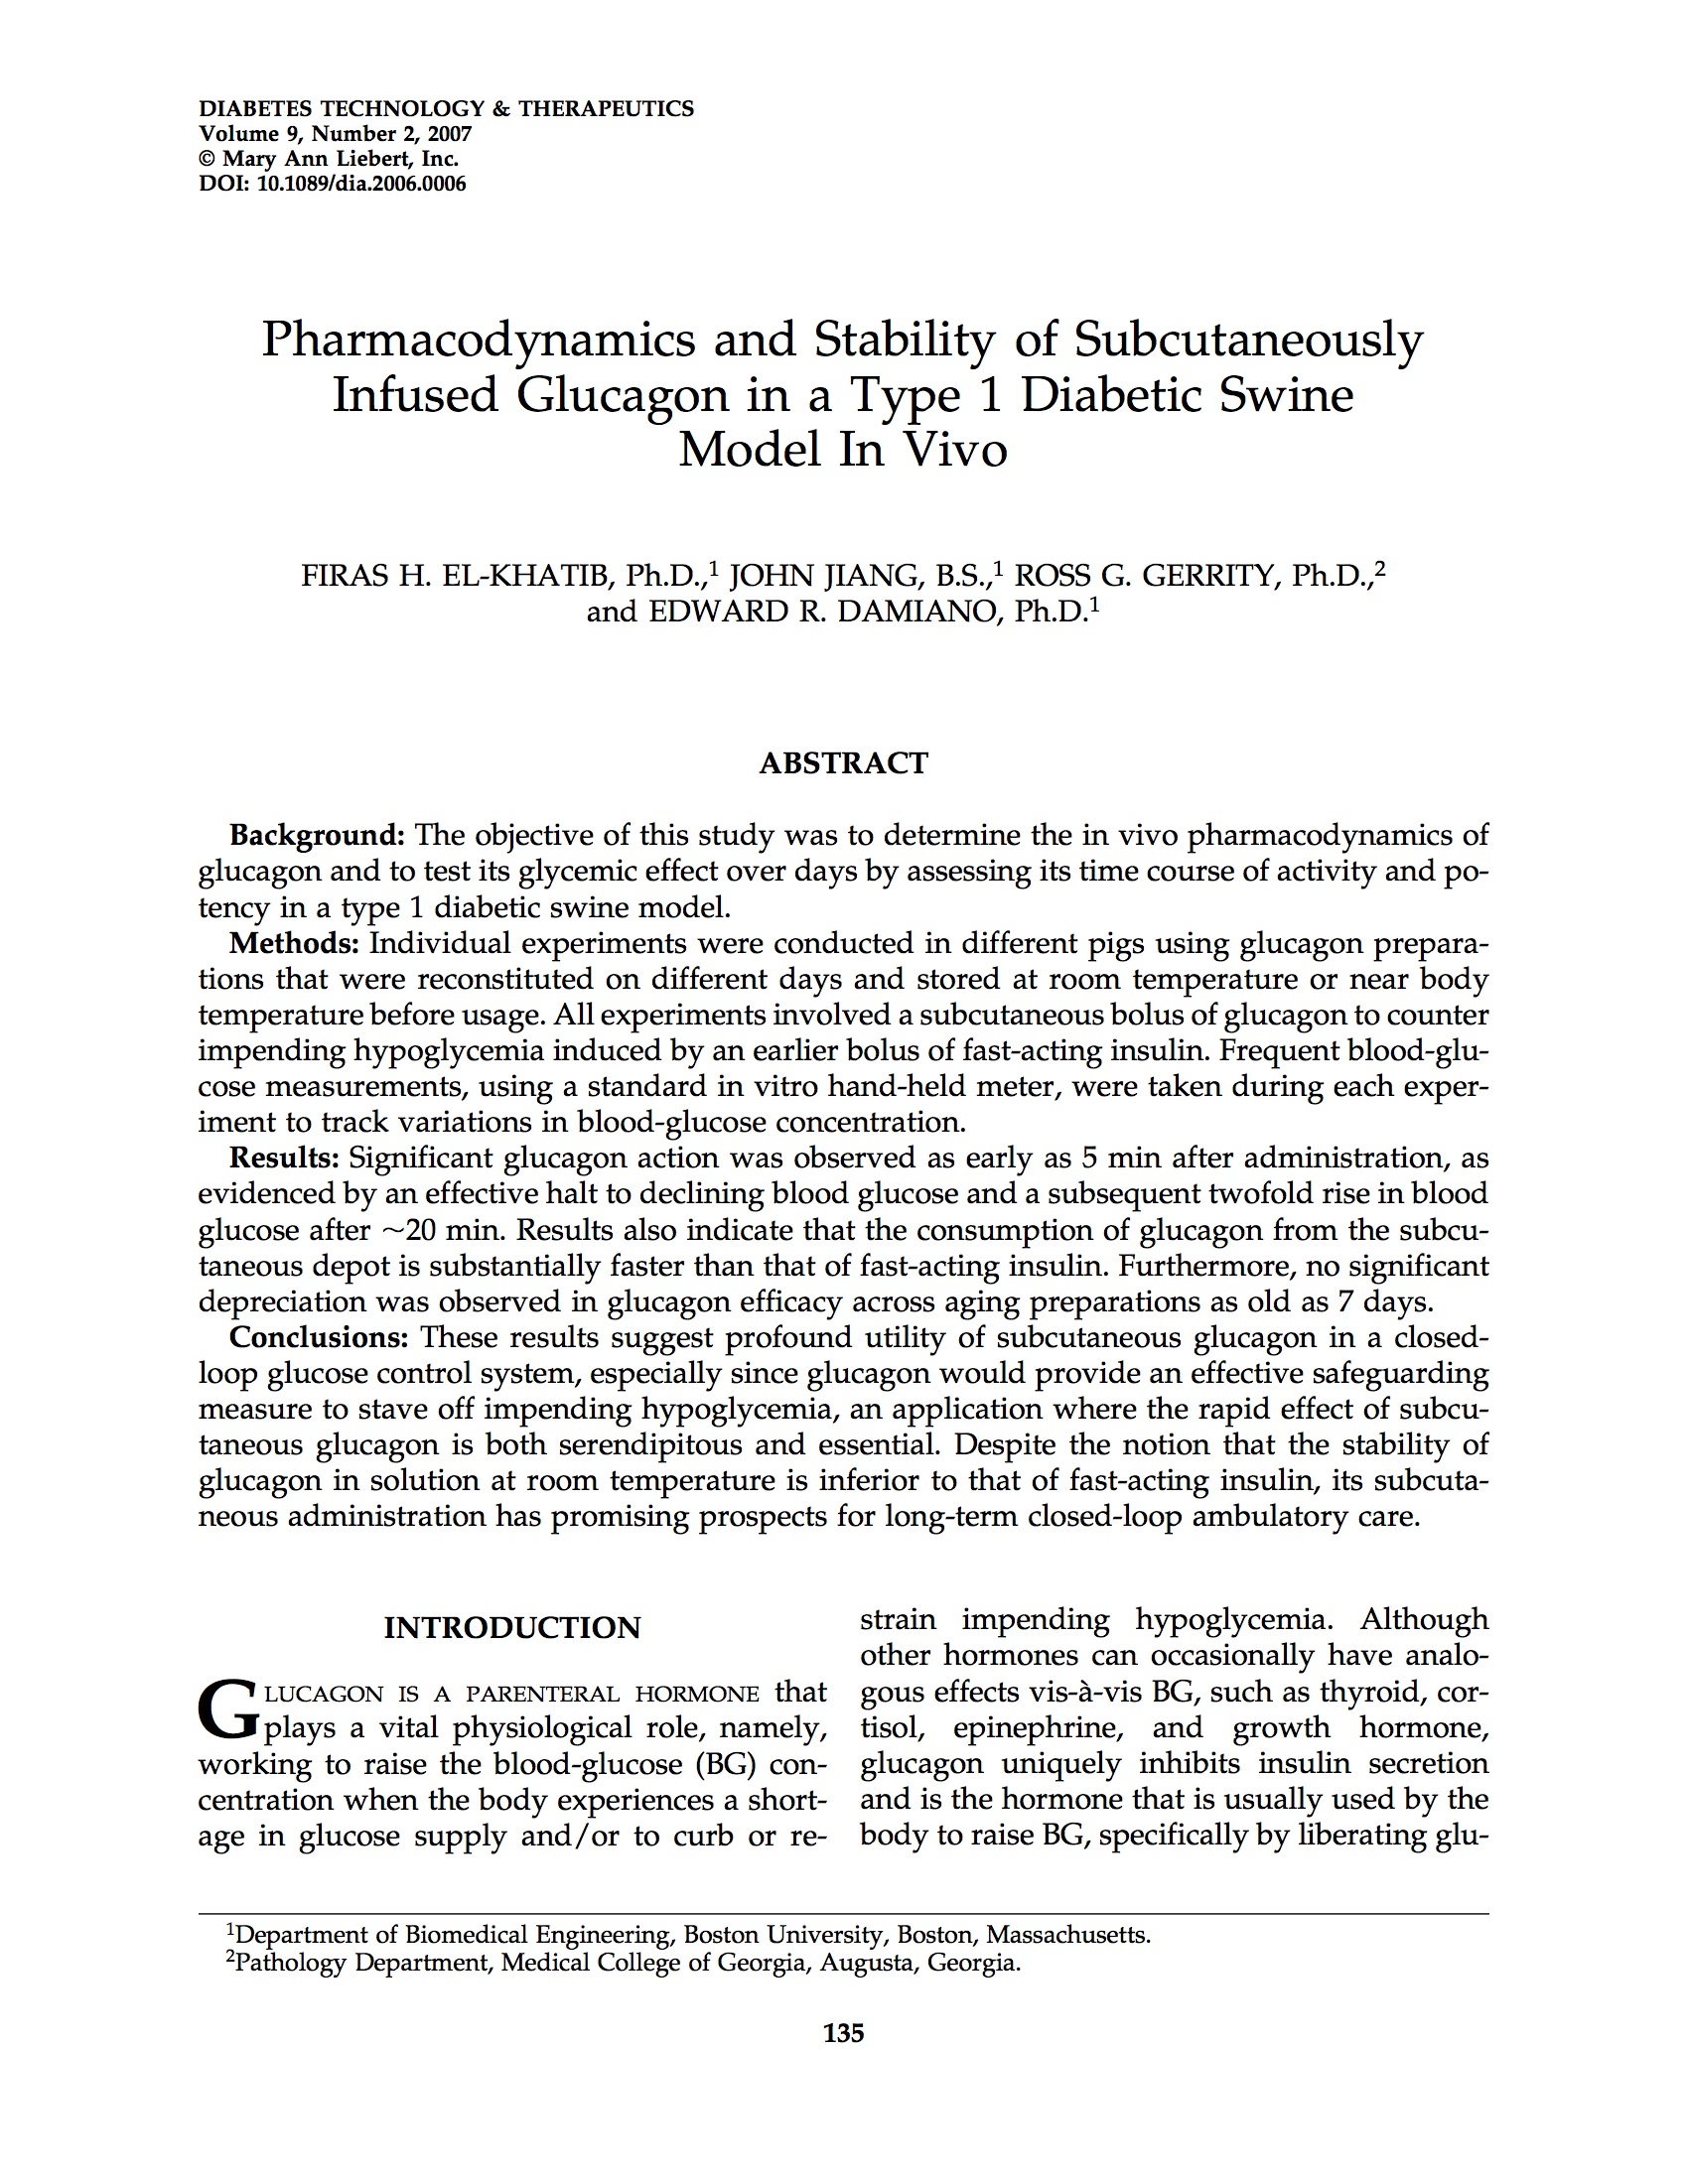 Pharmacodynamics and Stability of Subcutaneously Infused Glucagon